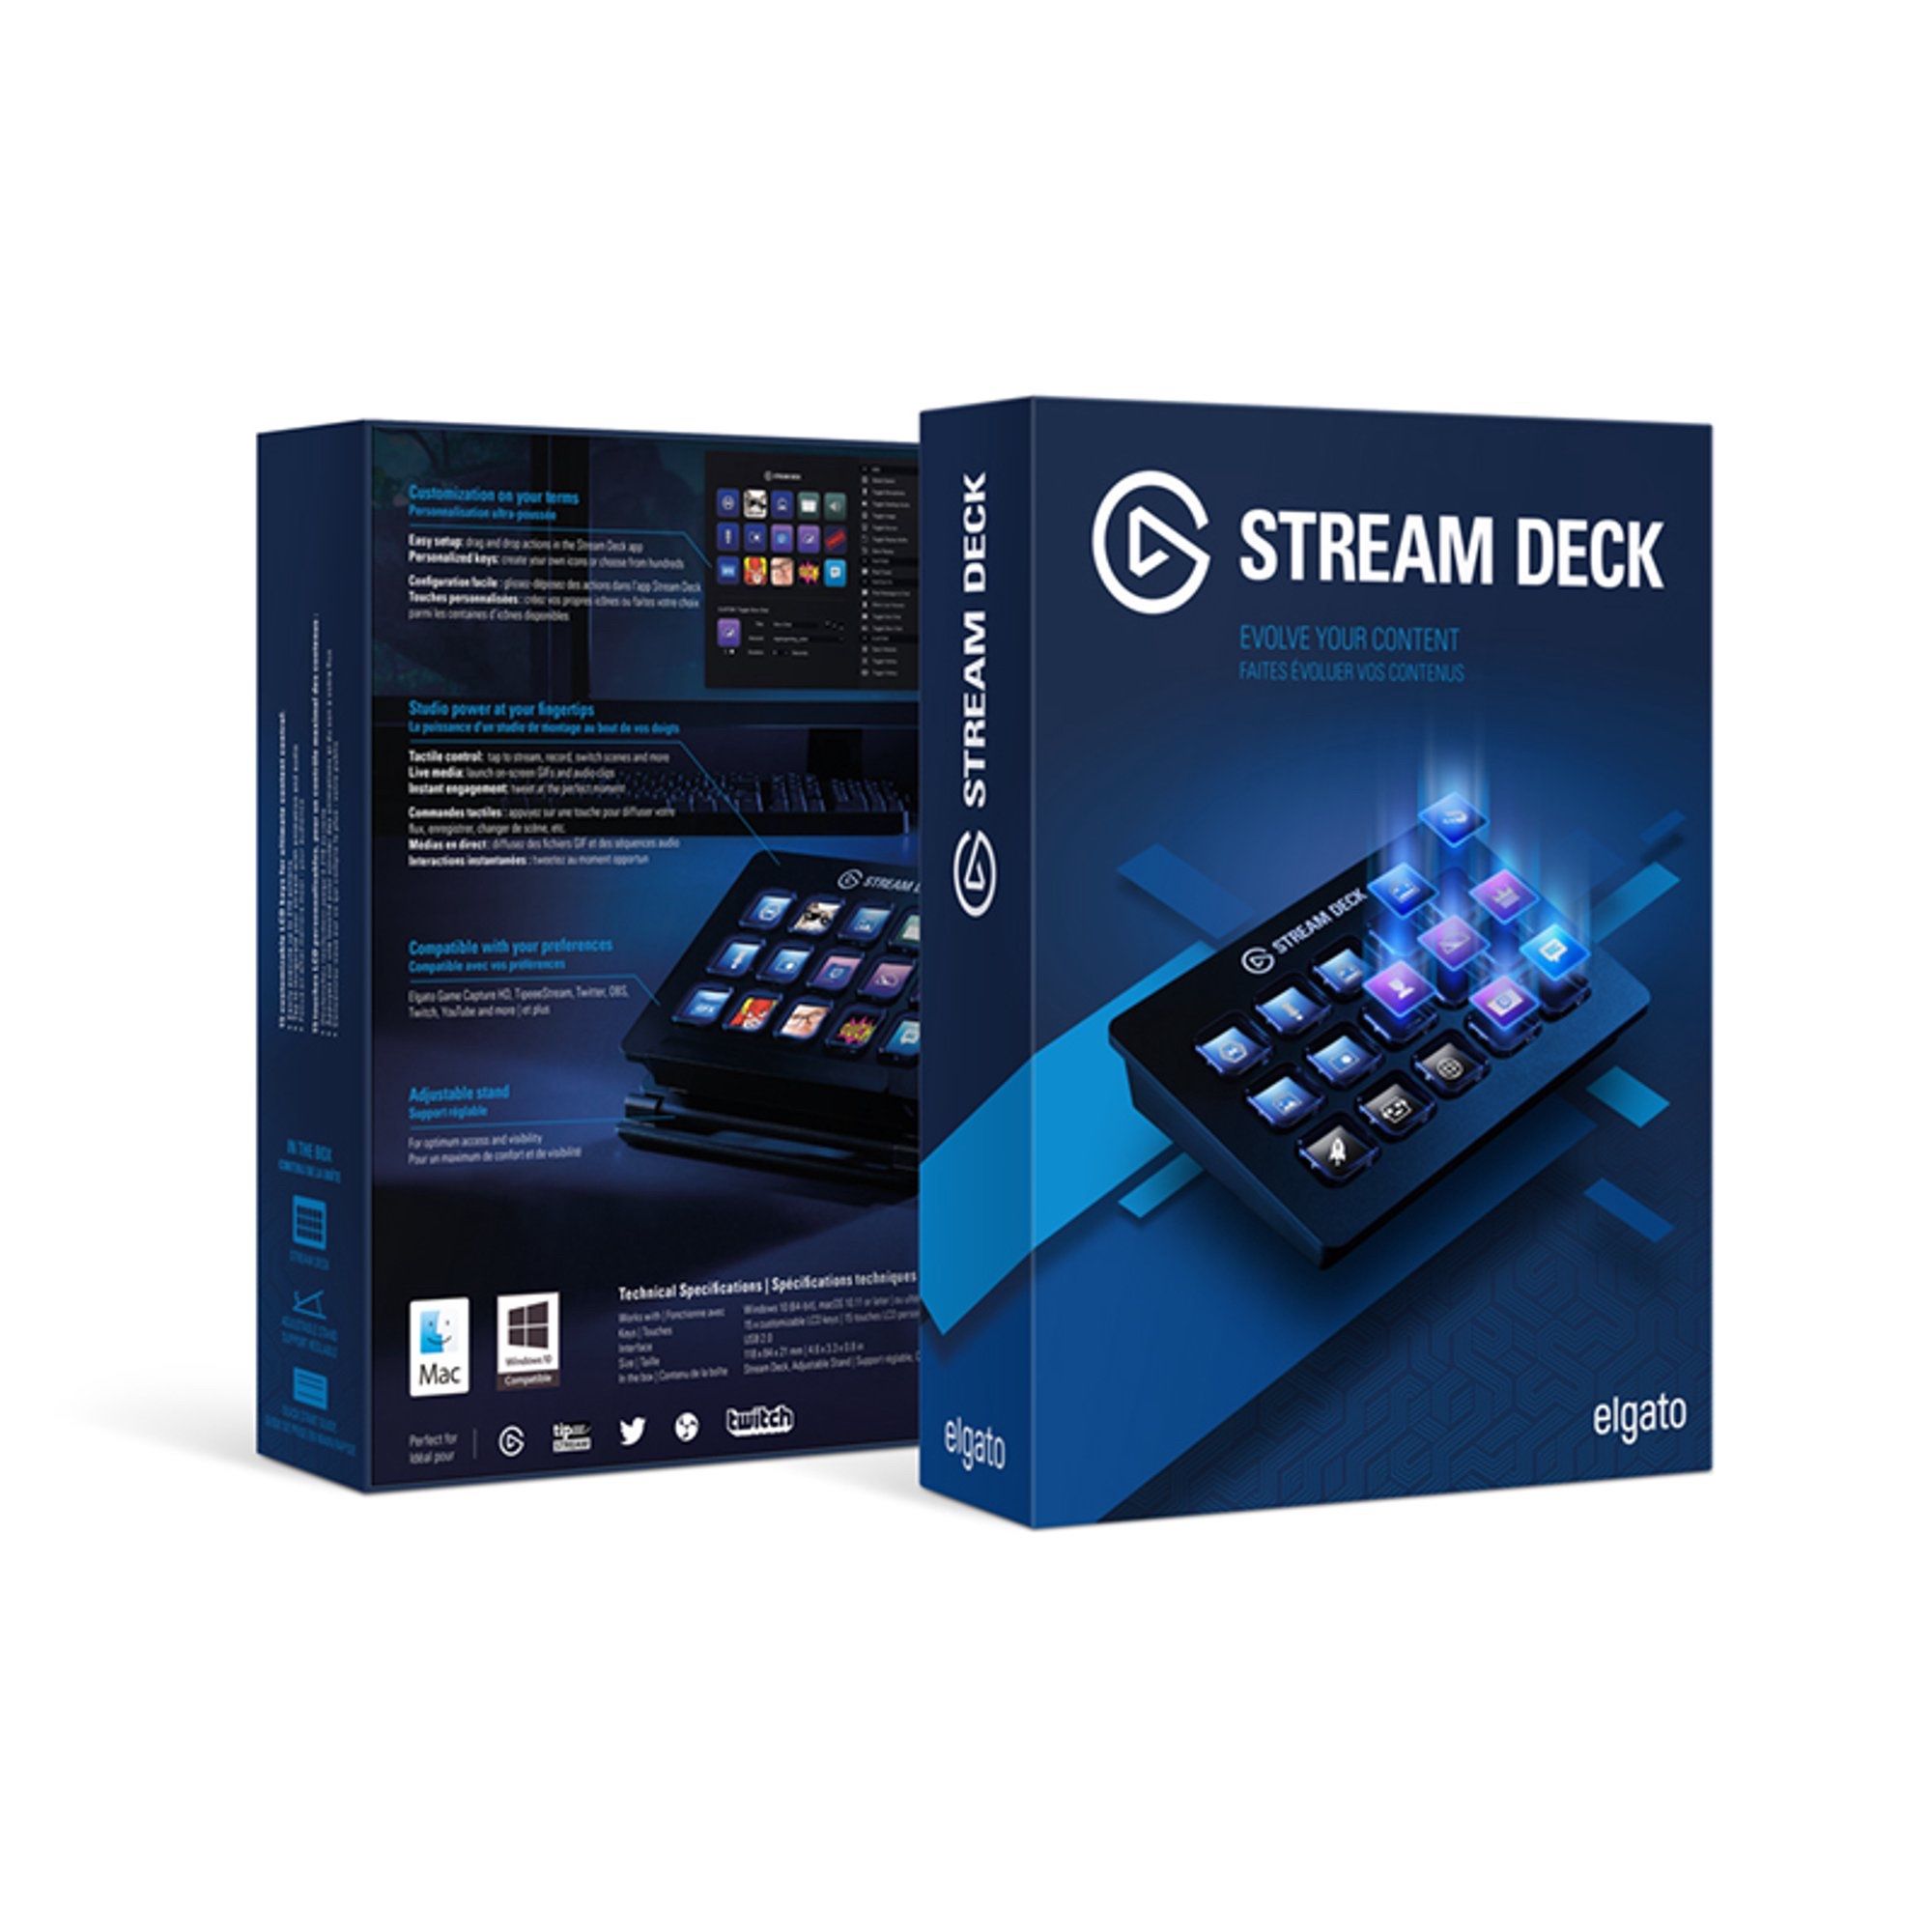 Elgato Stream Deck Live content creation controller - Factory Sealed (NEW)